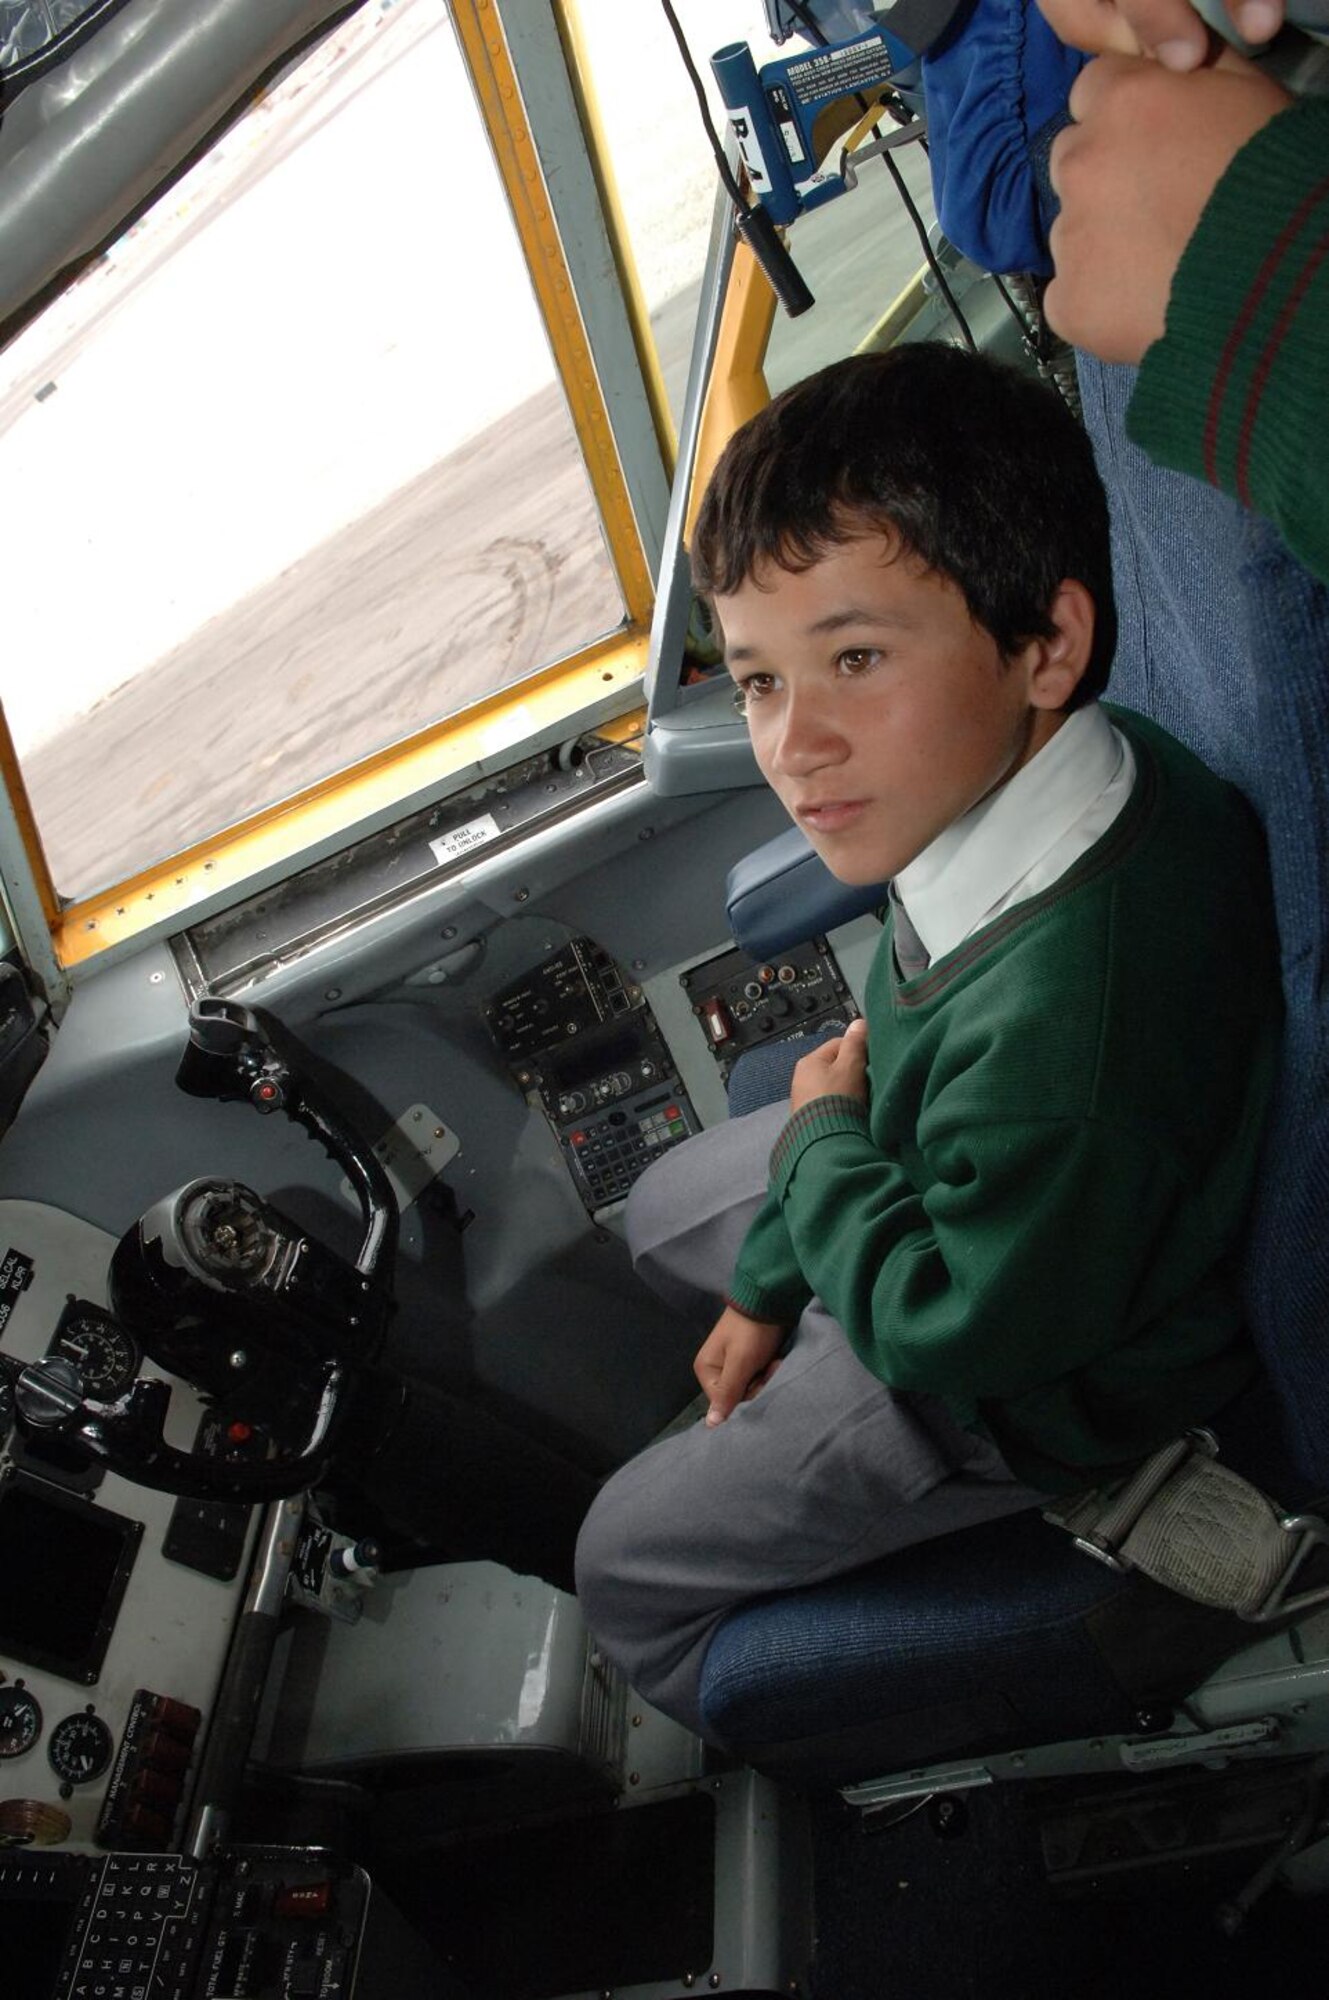 IQUIQUE, Chile -- A young boy from Colegio Macaya school in Alto Hospicia sits in the cockpit of a KC-135 during a base tour here Oct. 30. Students were invited to the base to see U.S. and Chilean Air Force aircraft, and meet Airmen. (U.S. Air Force photo by Tech. Sgt. Eric Petosky)